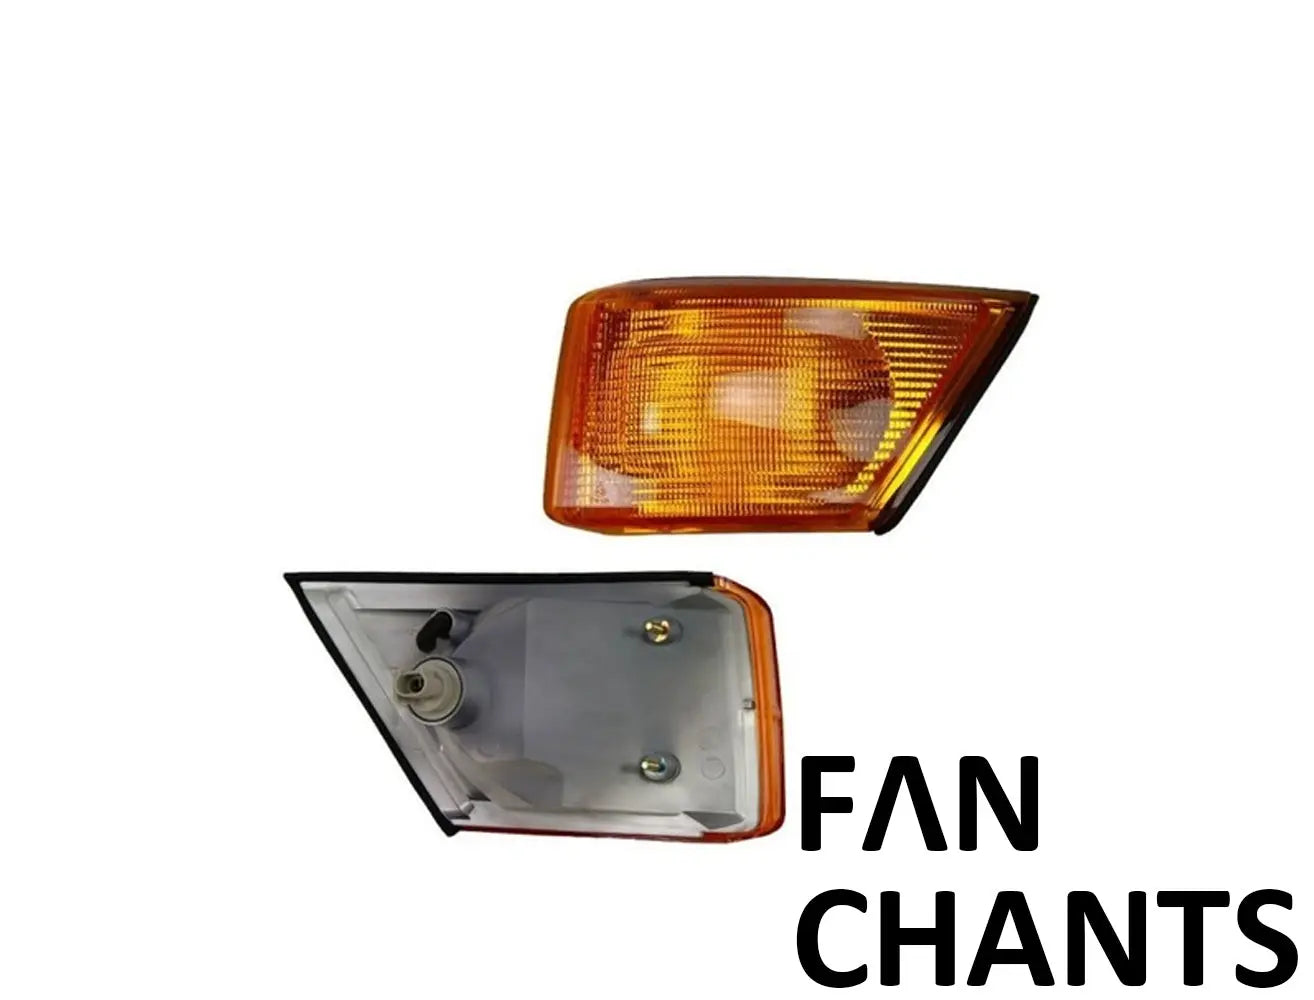 CHINA Factory Wholesale 500320426 Signal Lamp LH FOR IVECO FANCHANTS China Auto Parts Wholesales